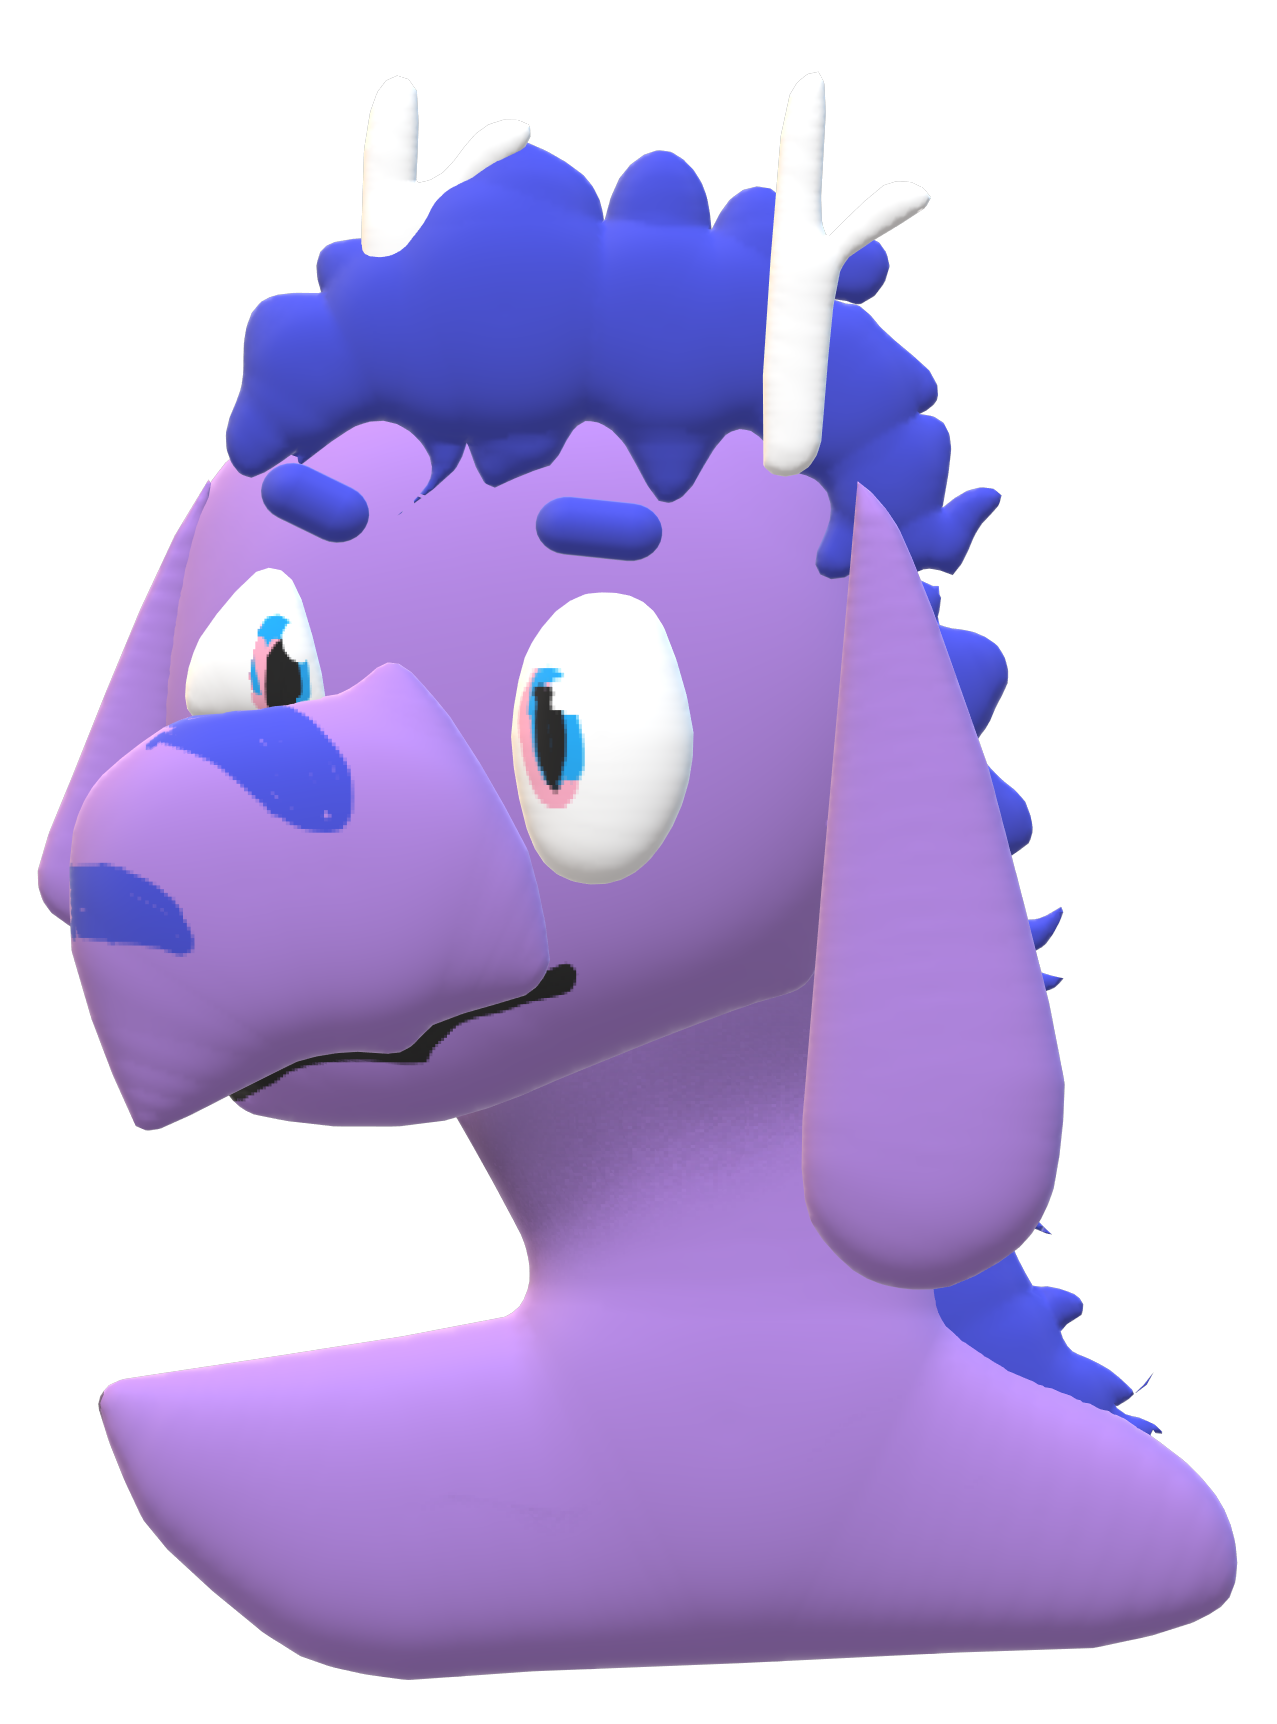 a bust of orbit in a 3d style